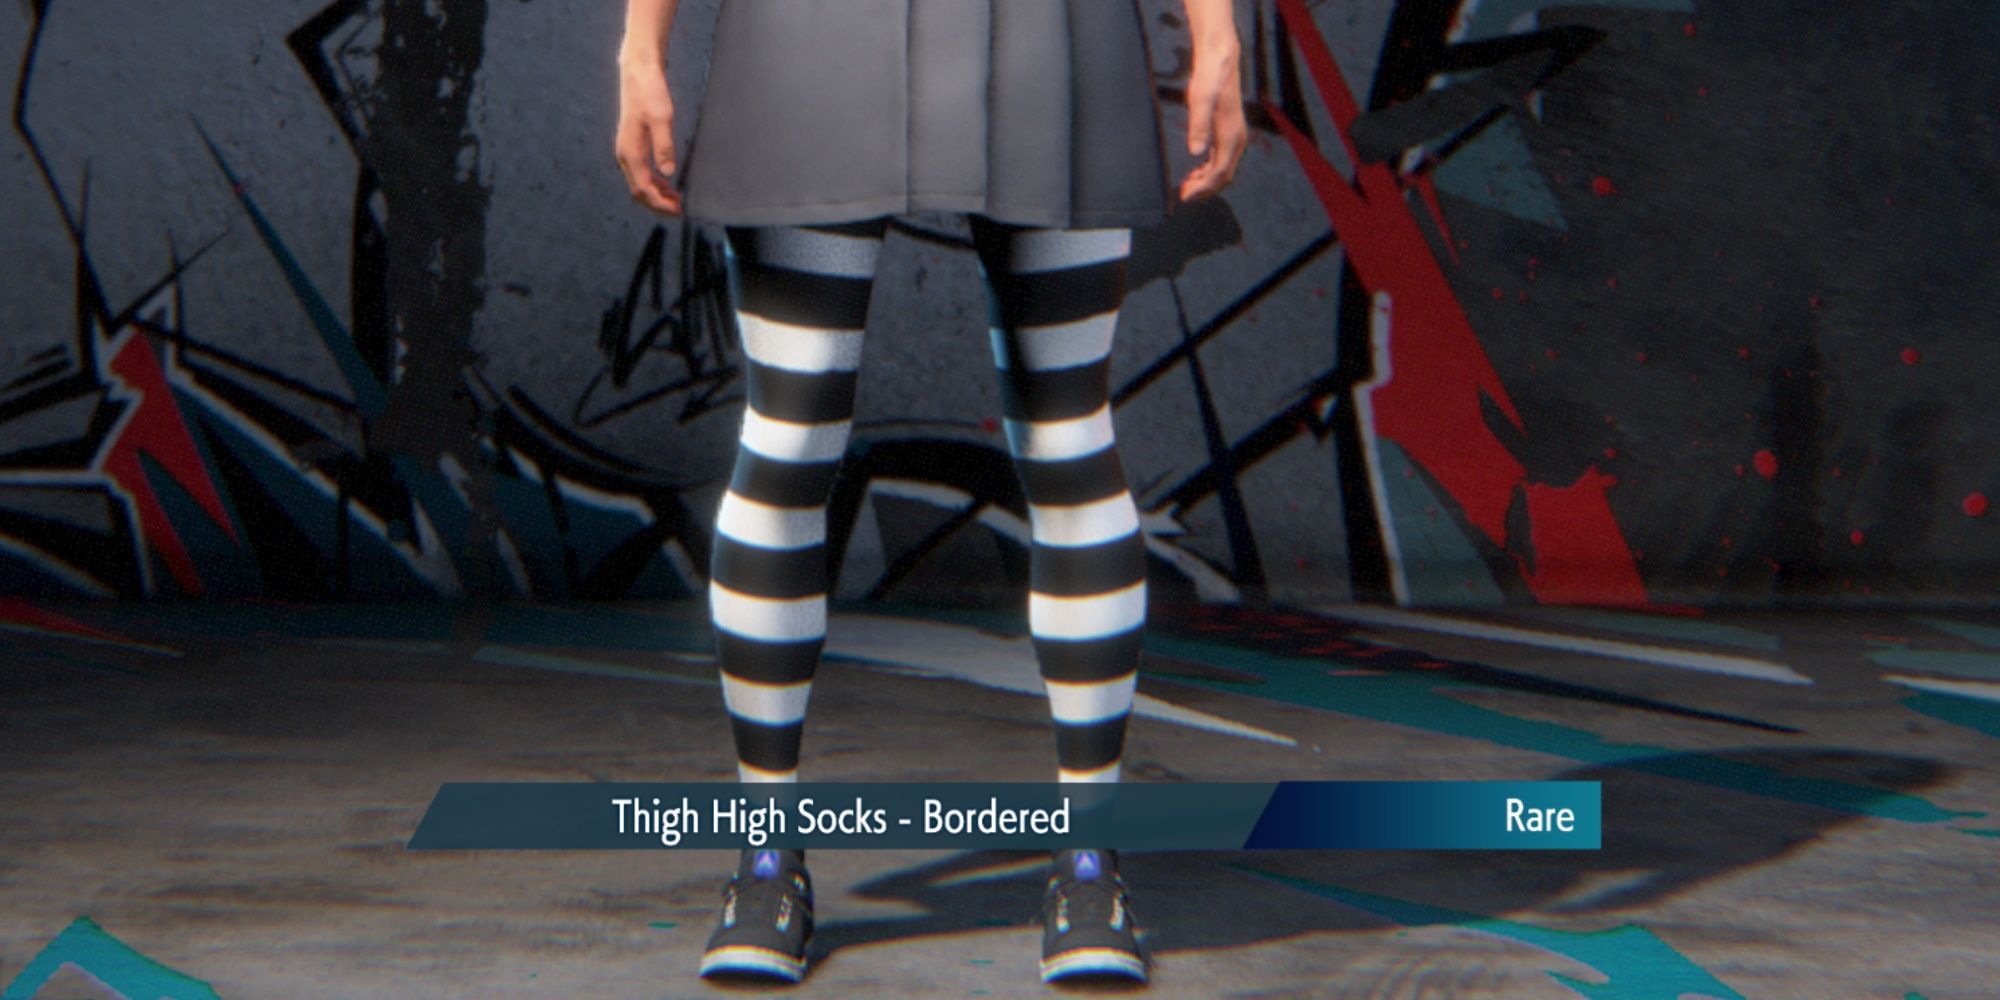 The Thigh High Socks - Bordered Rare Equipment in Street Fighter 6